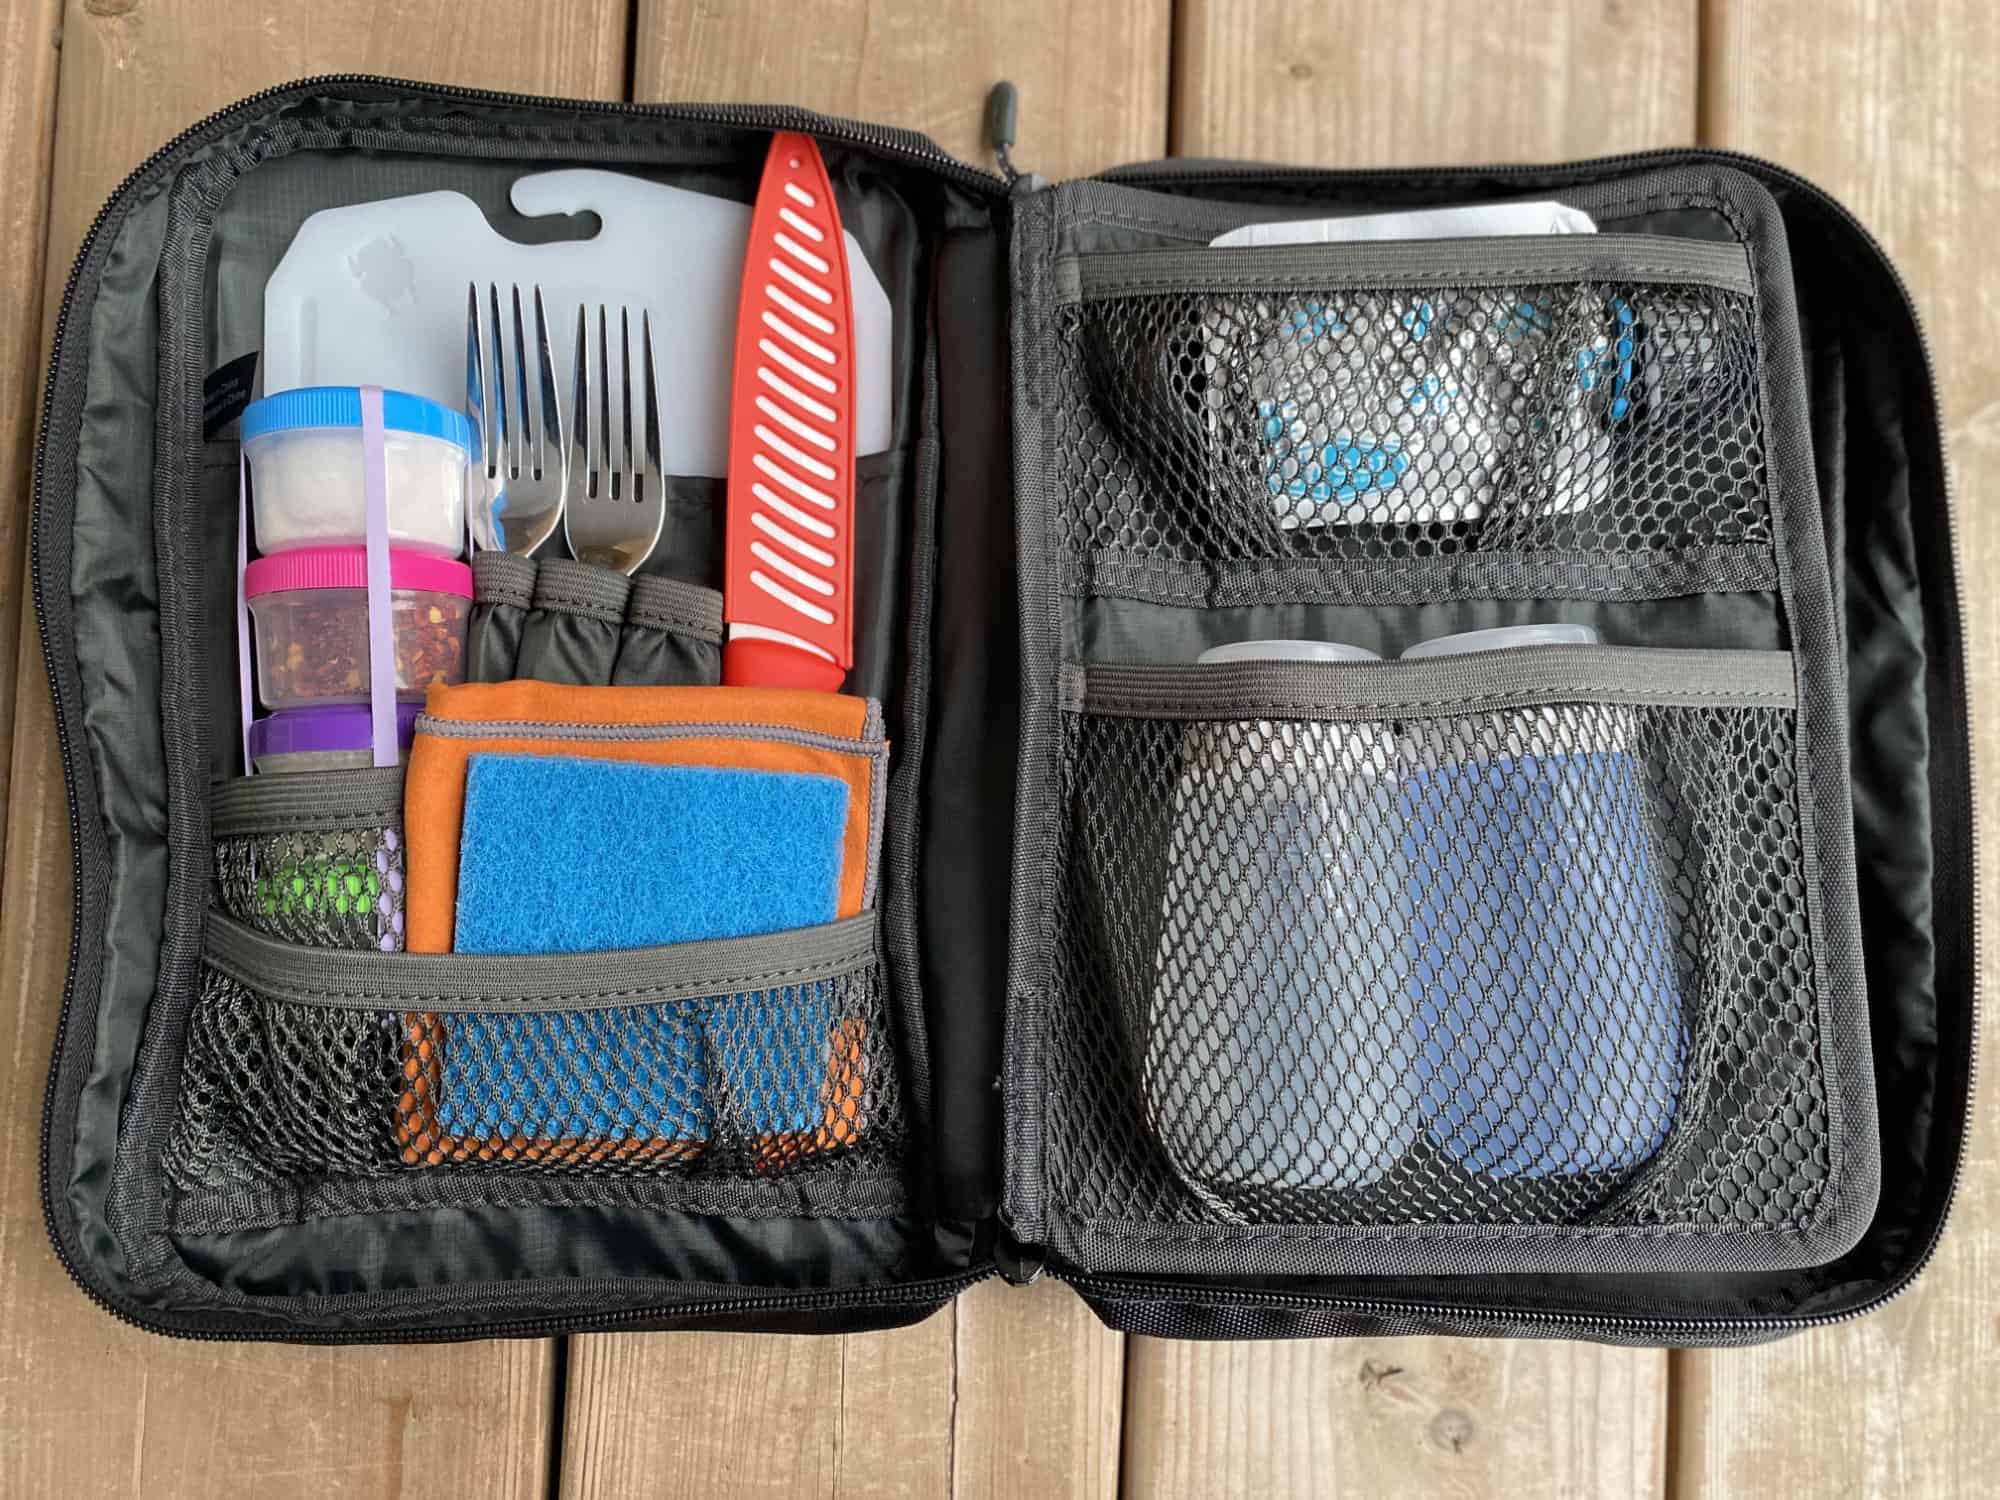 Travel Kitchen Set: The Essentials for Cooking While Traveling